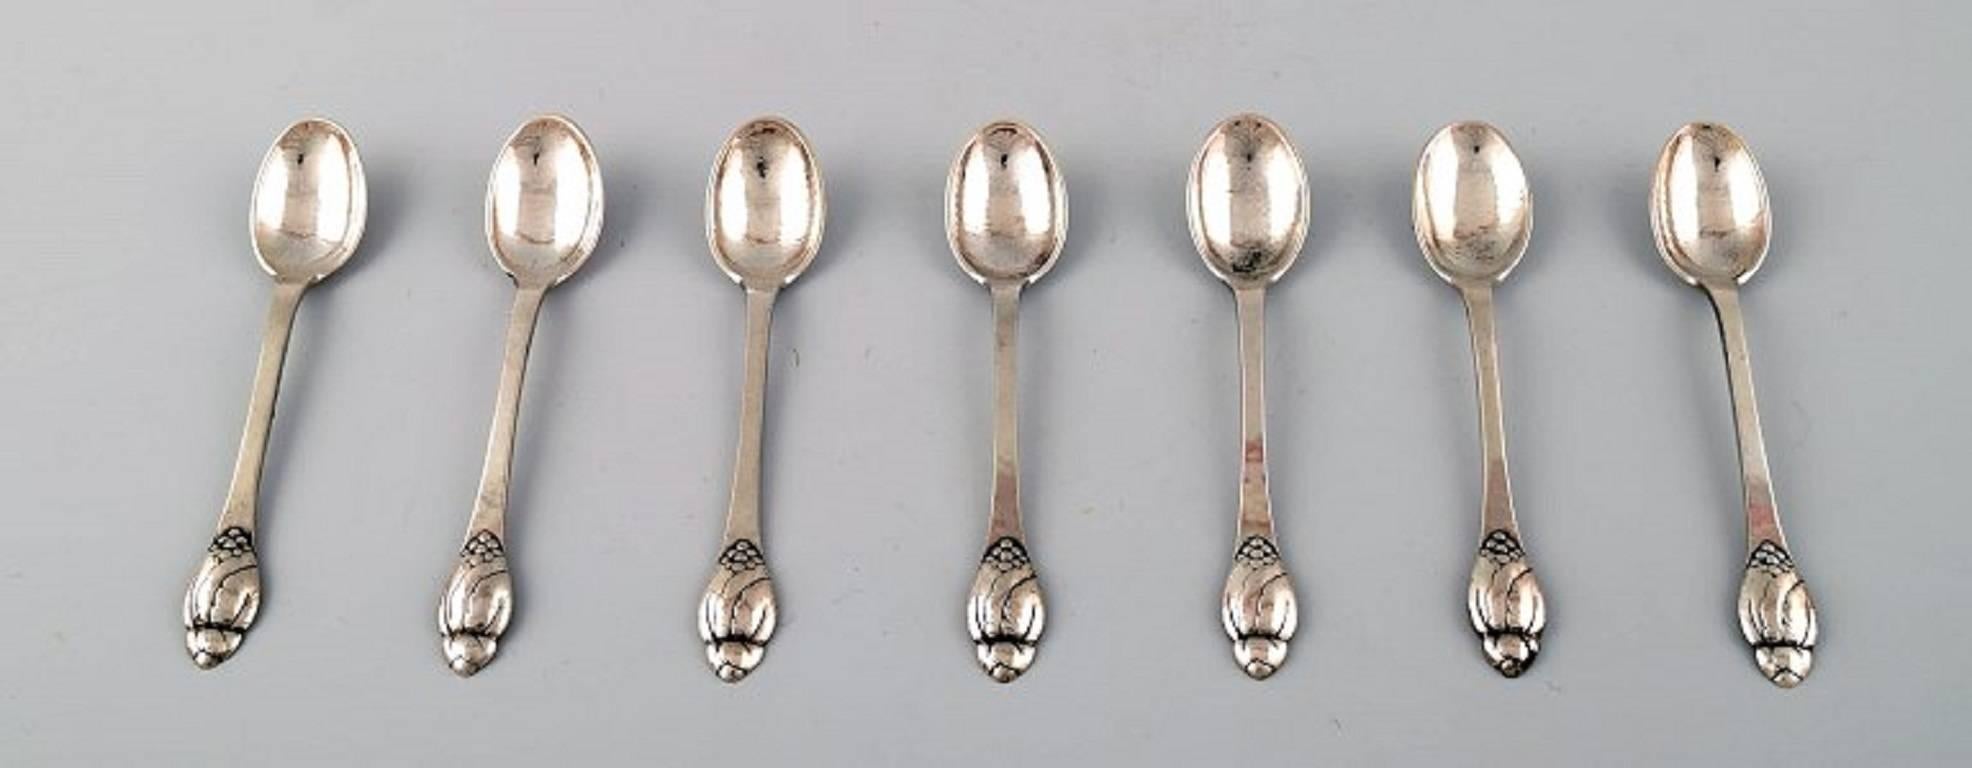 Evald Nielsen number 6, seven teaspoon in silver.
Denmark 1920s-1930s.
Measures 12.5 cm.
Stamped.
In perfect condition.